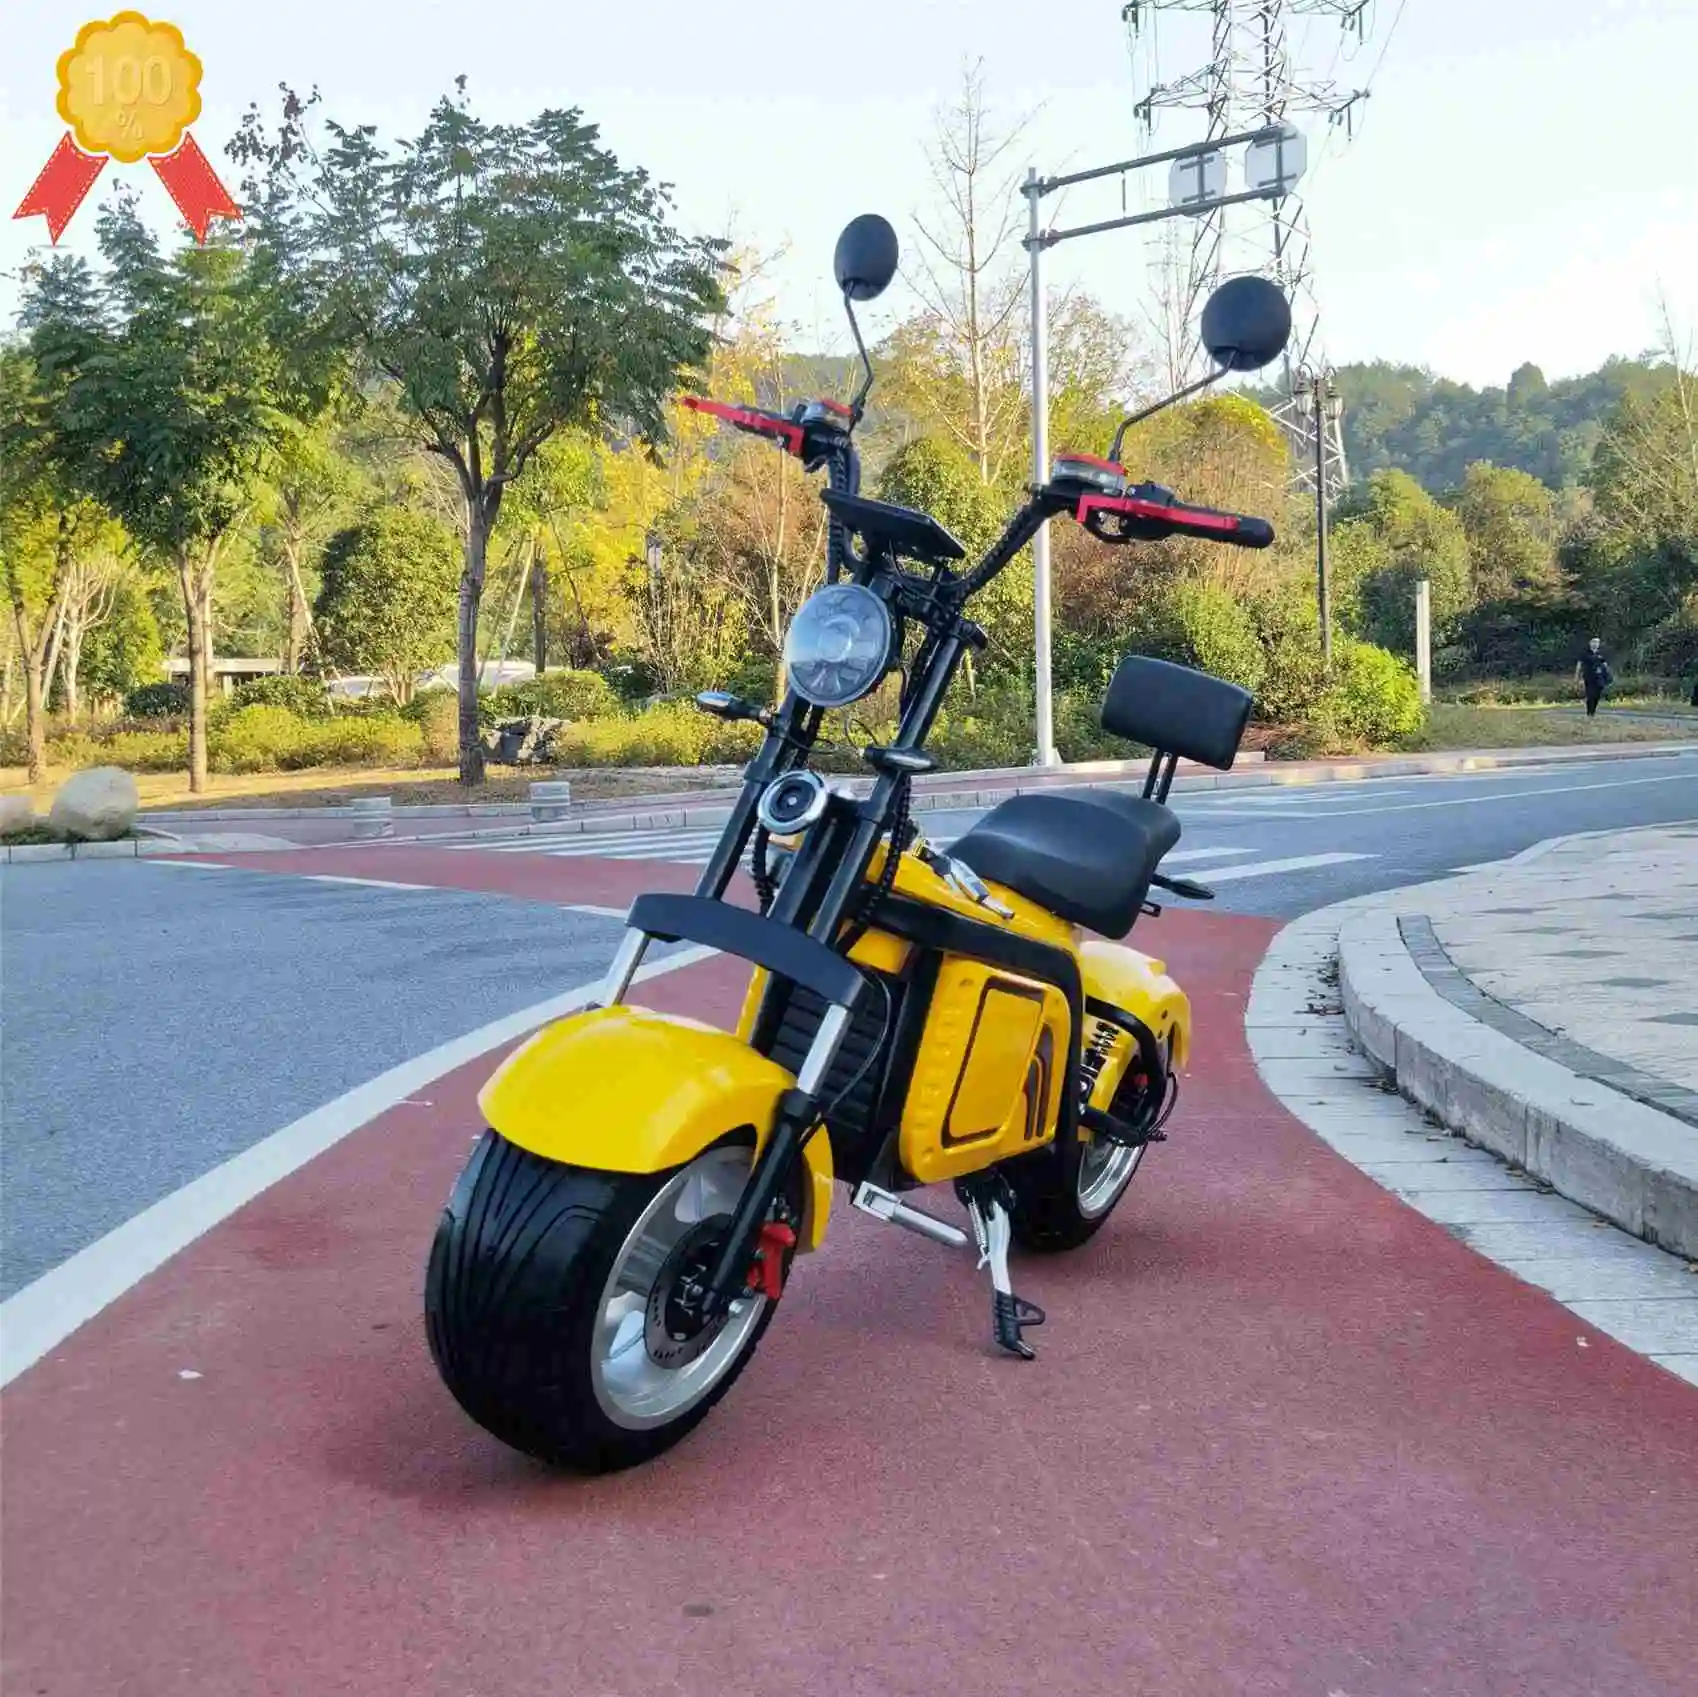 

2000W 72V 30AH Electric Scooter/ Man Smart Electric Motorcycle Price From China Manufacturer With Best Quality